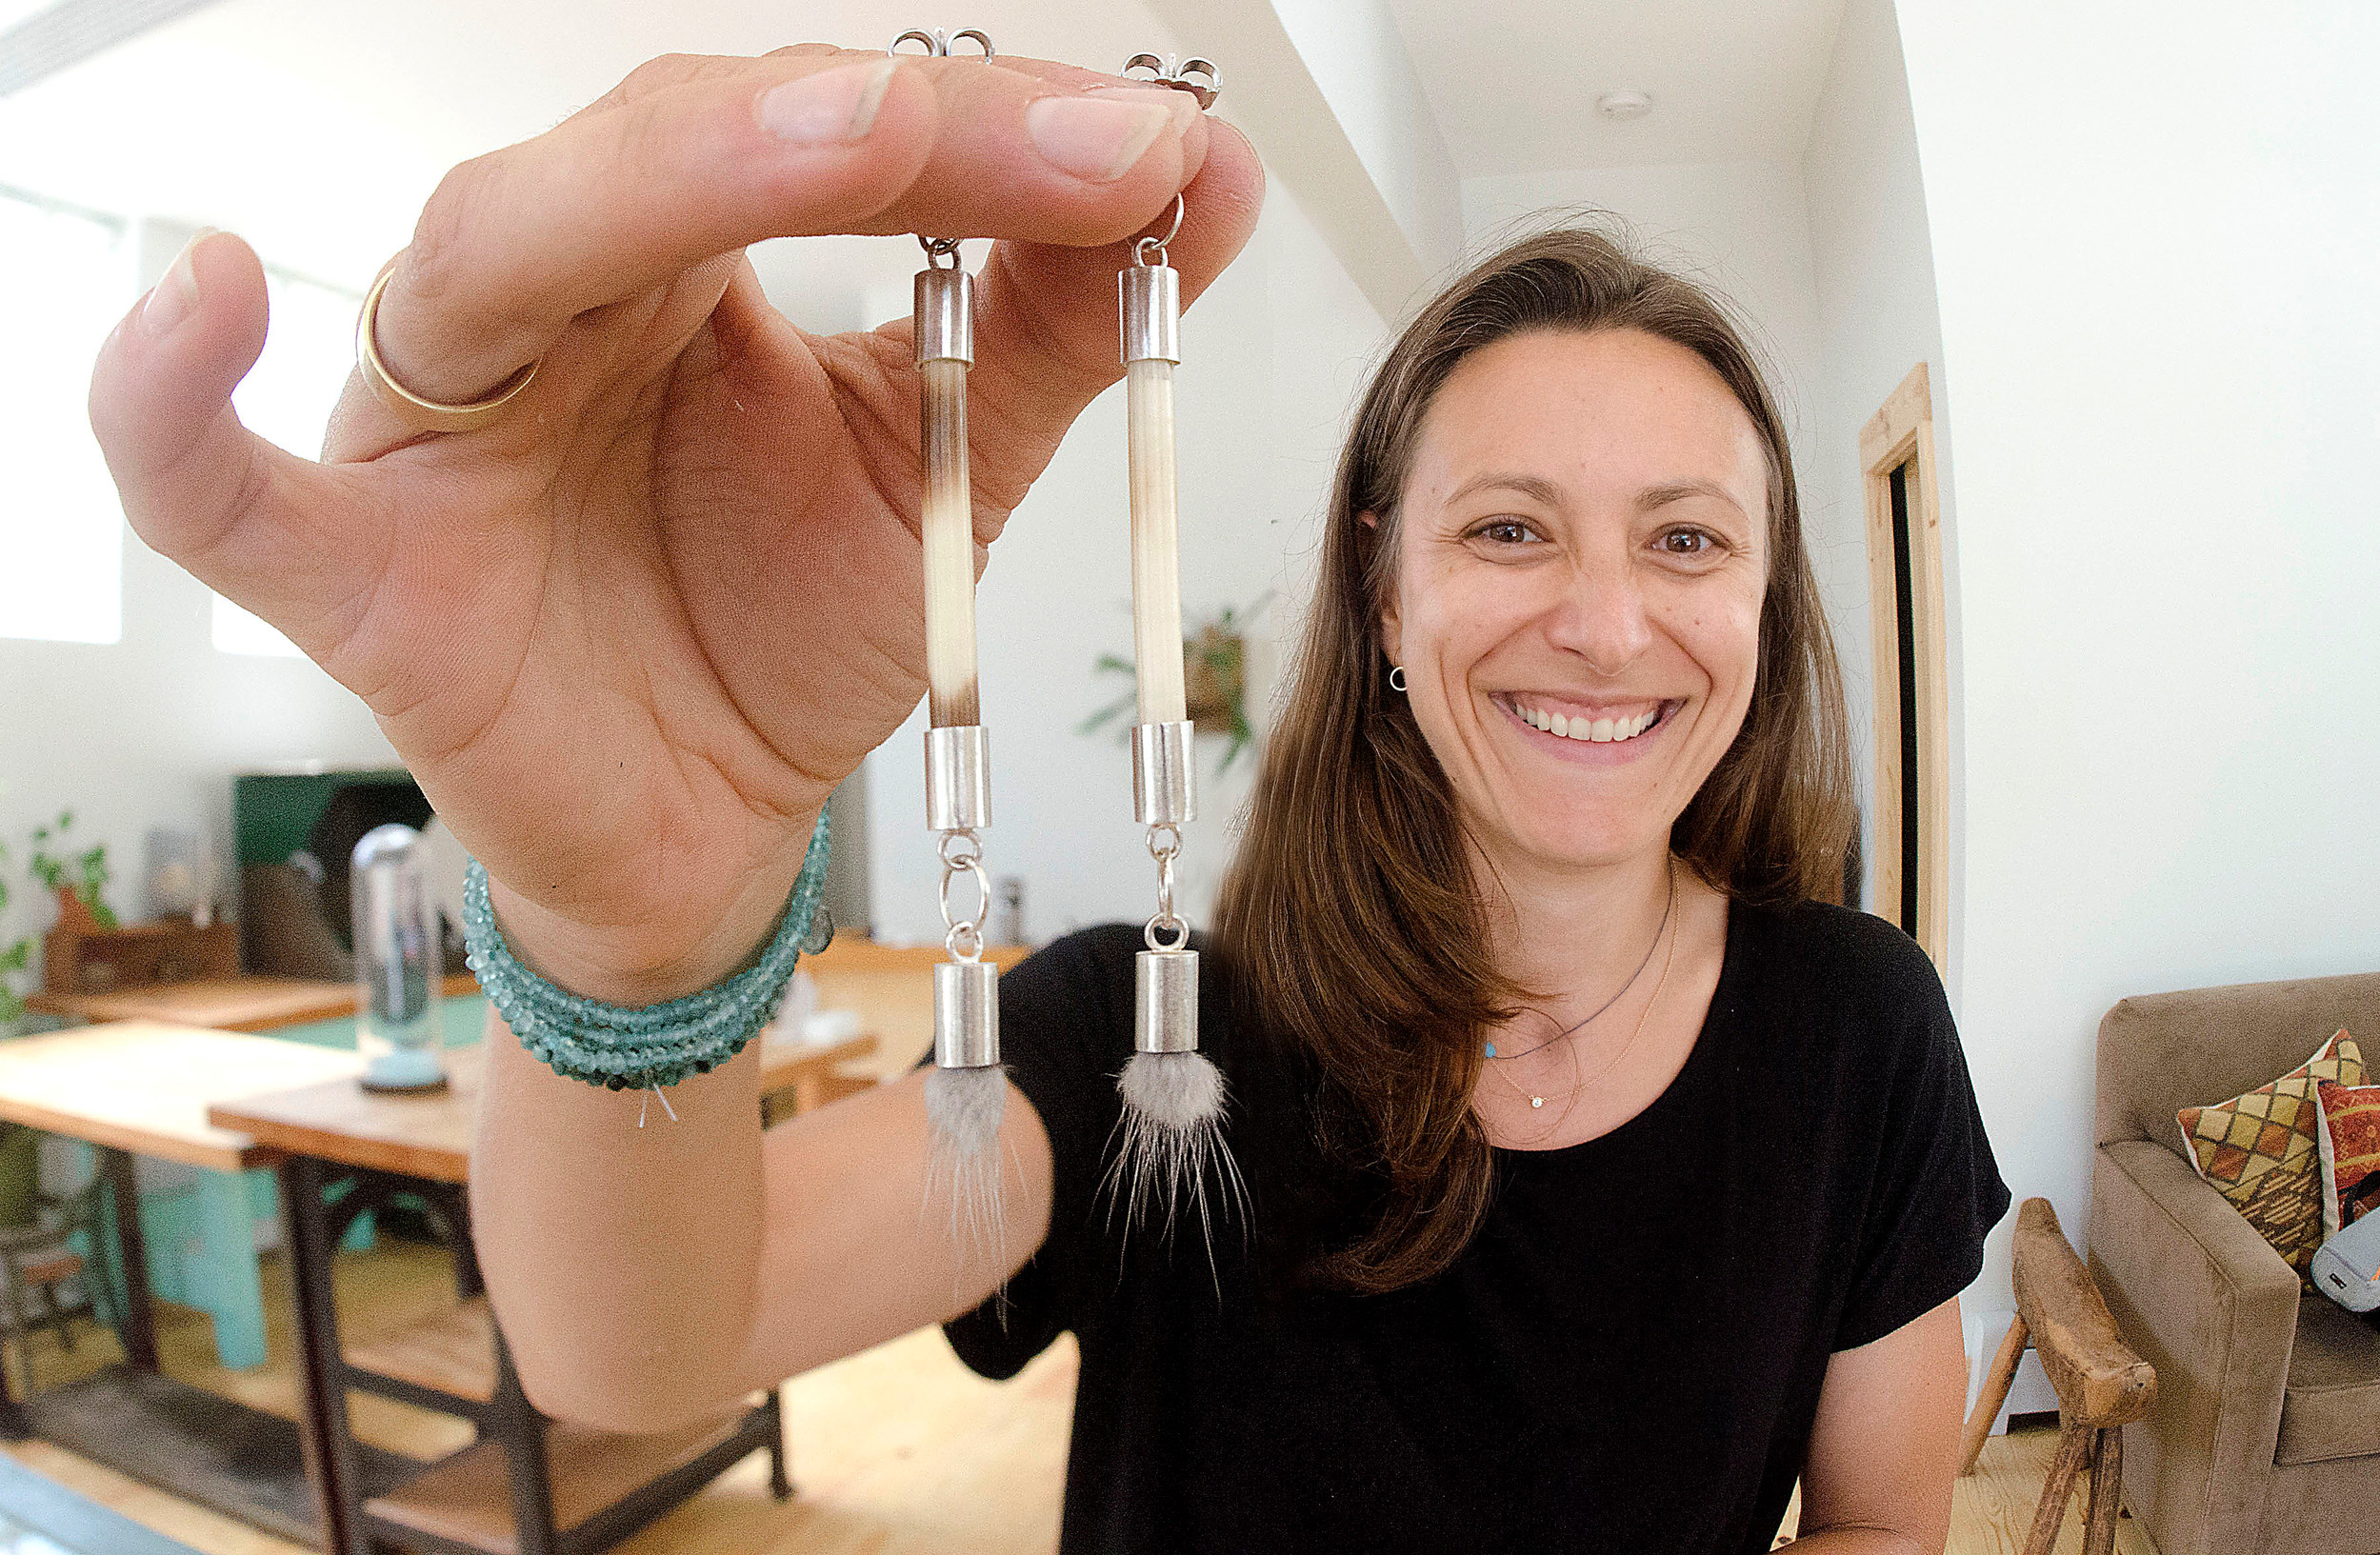 Artist and jeweler Kendall Reiss shows off a pair of earrings she crafted from porcupine quills and mink fur.